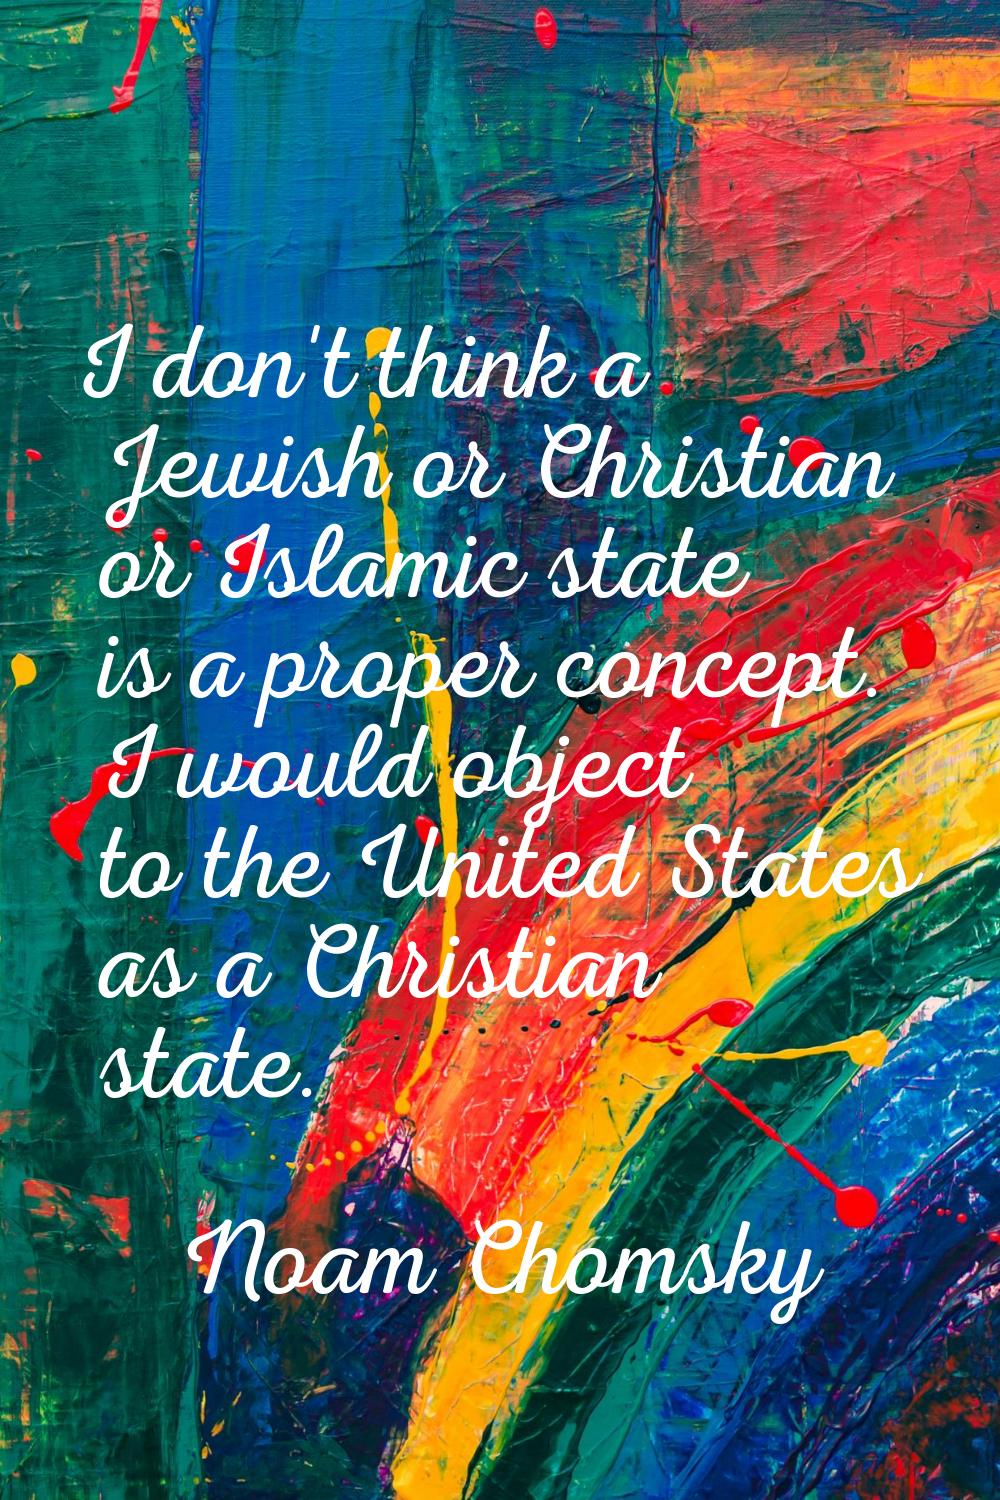 I don't think a Jewish or Christian or Islamic state is a proper concept. I would object to the Uni